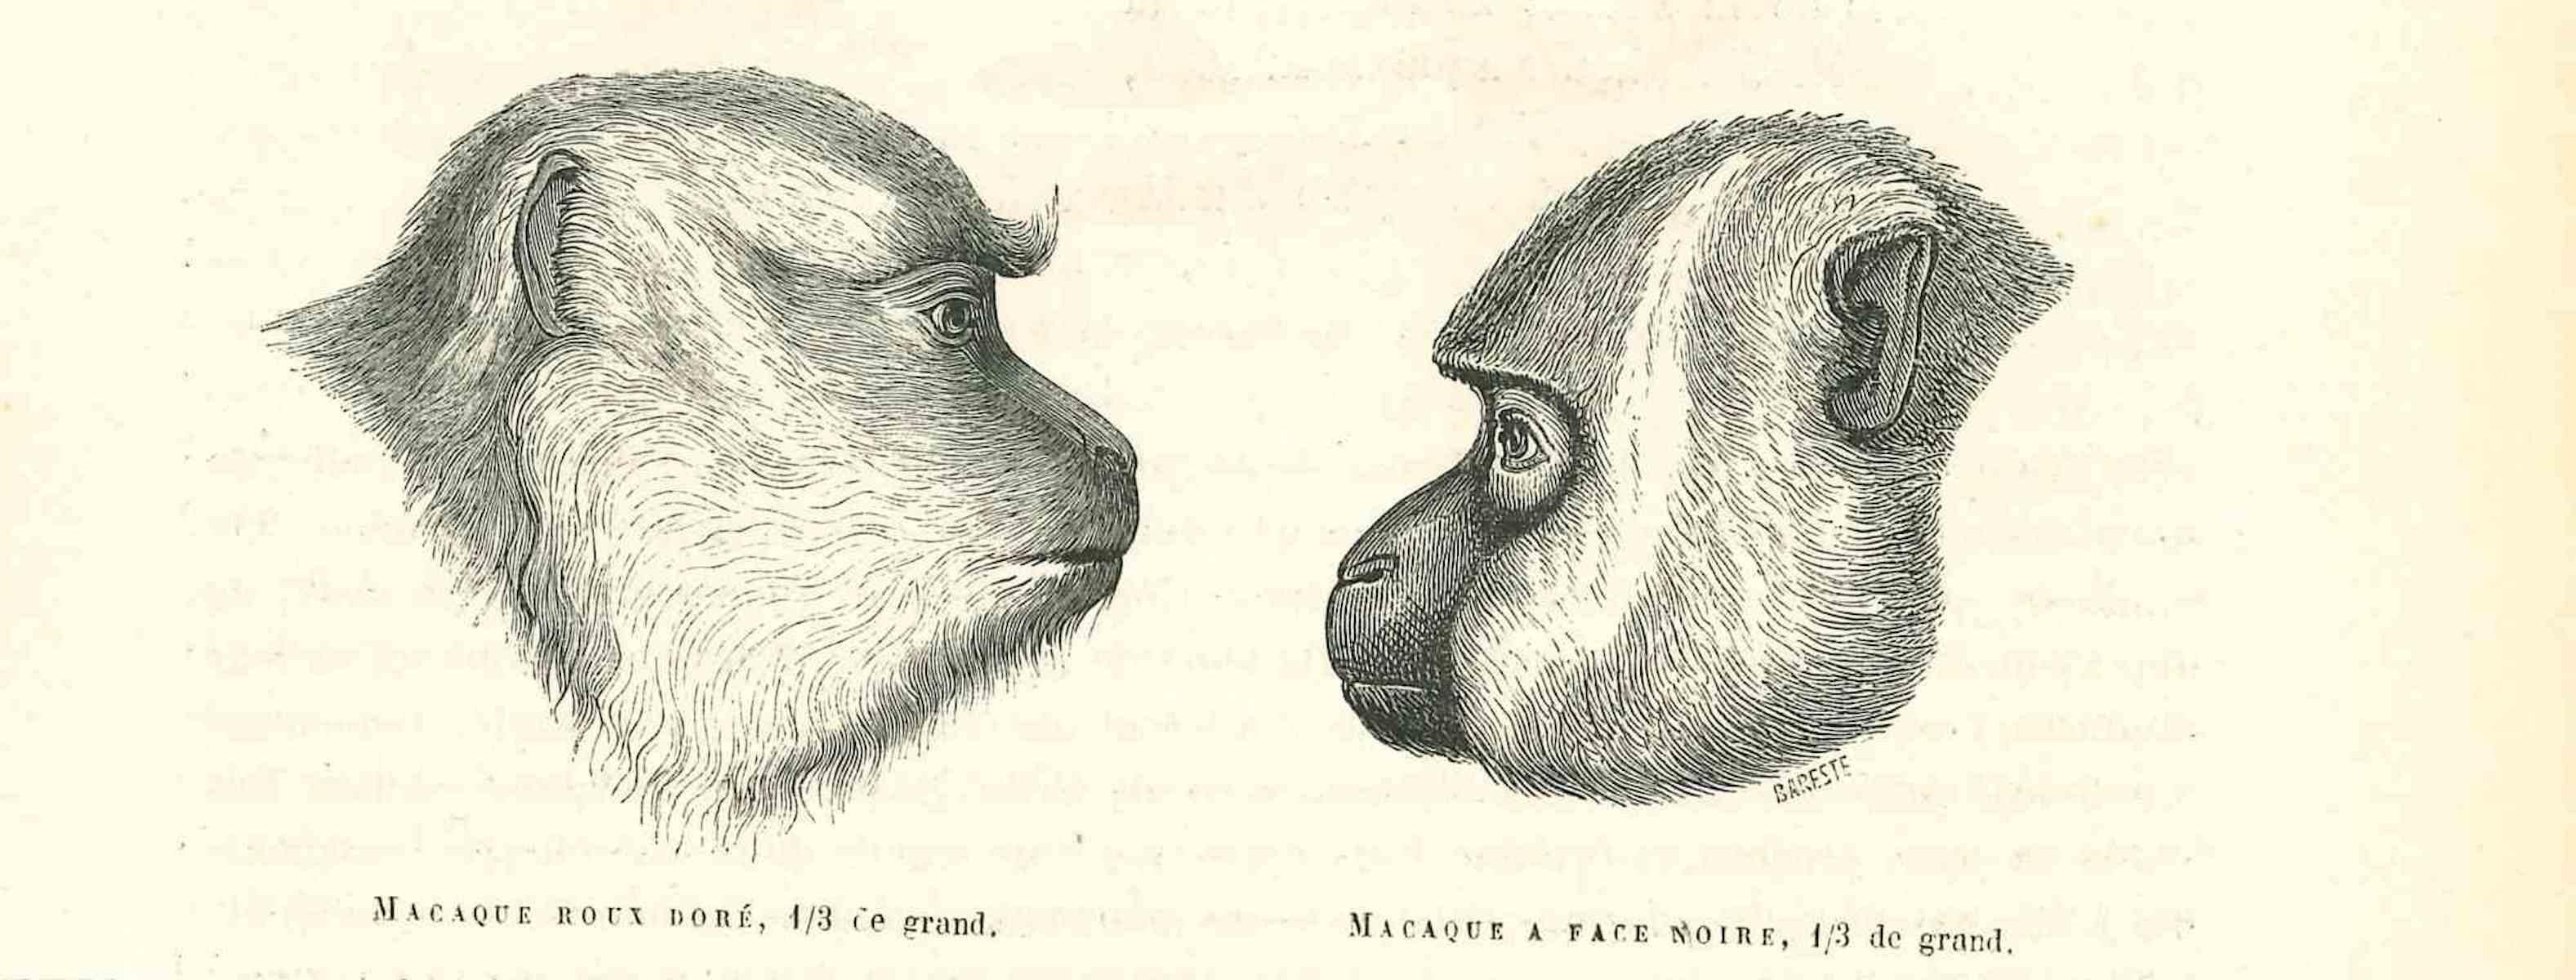 The Monkeys Look is an original lithograph on ivory-colored paper, realized by Paul Gervais (1816-1879). The artwork is from The Series of "Les Trois Règnes de la Nature", and was published in 1854.

Good conditions.

Titled on the lower. With the